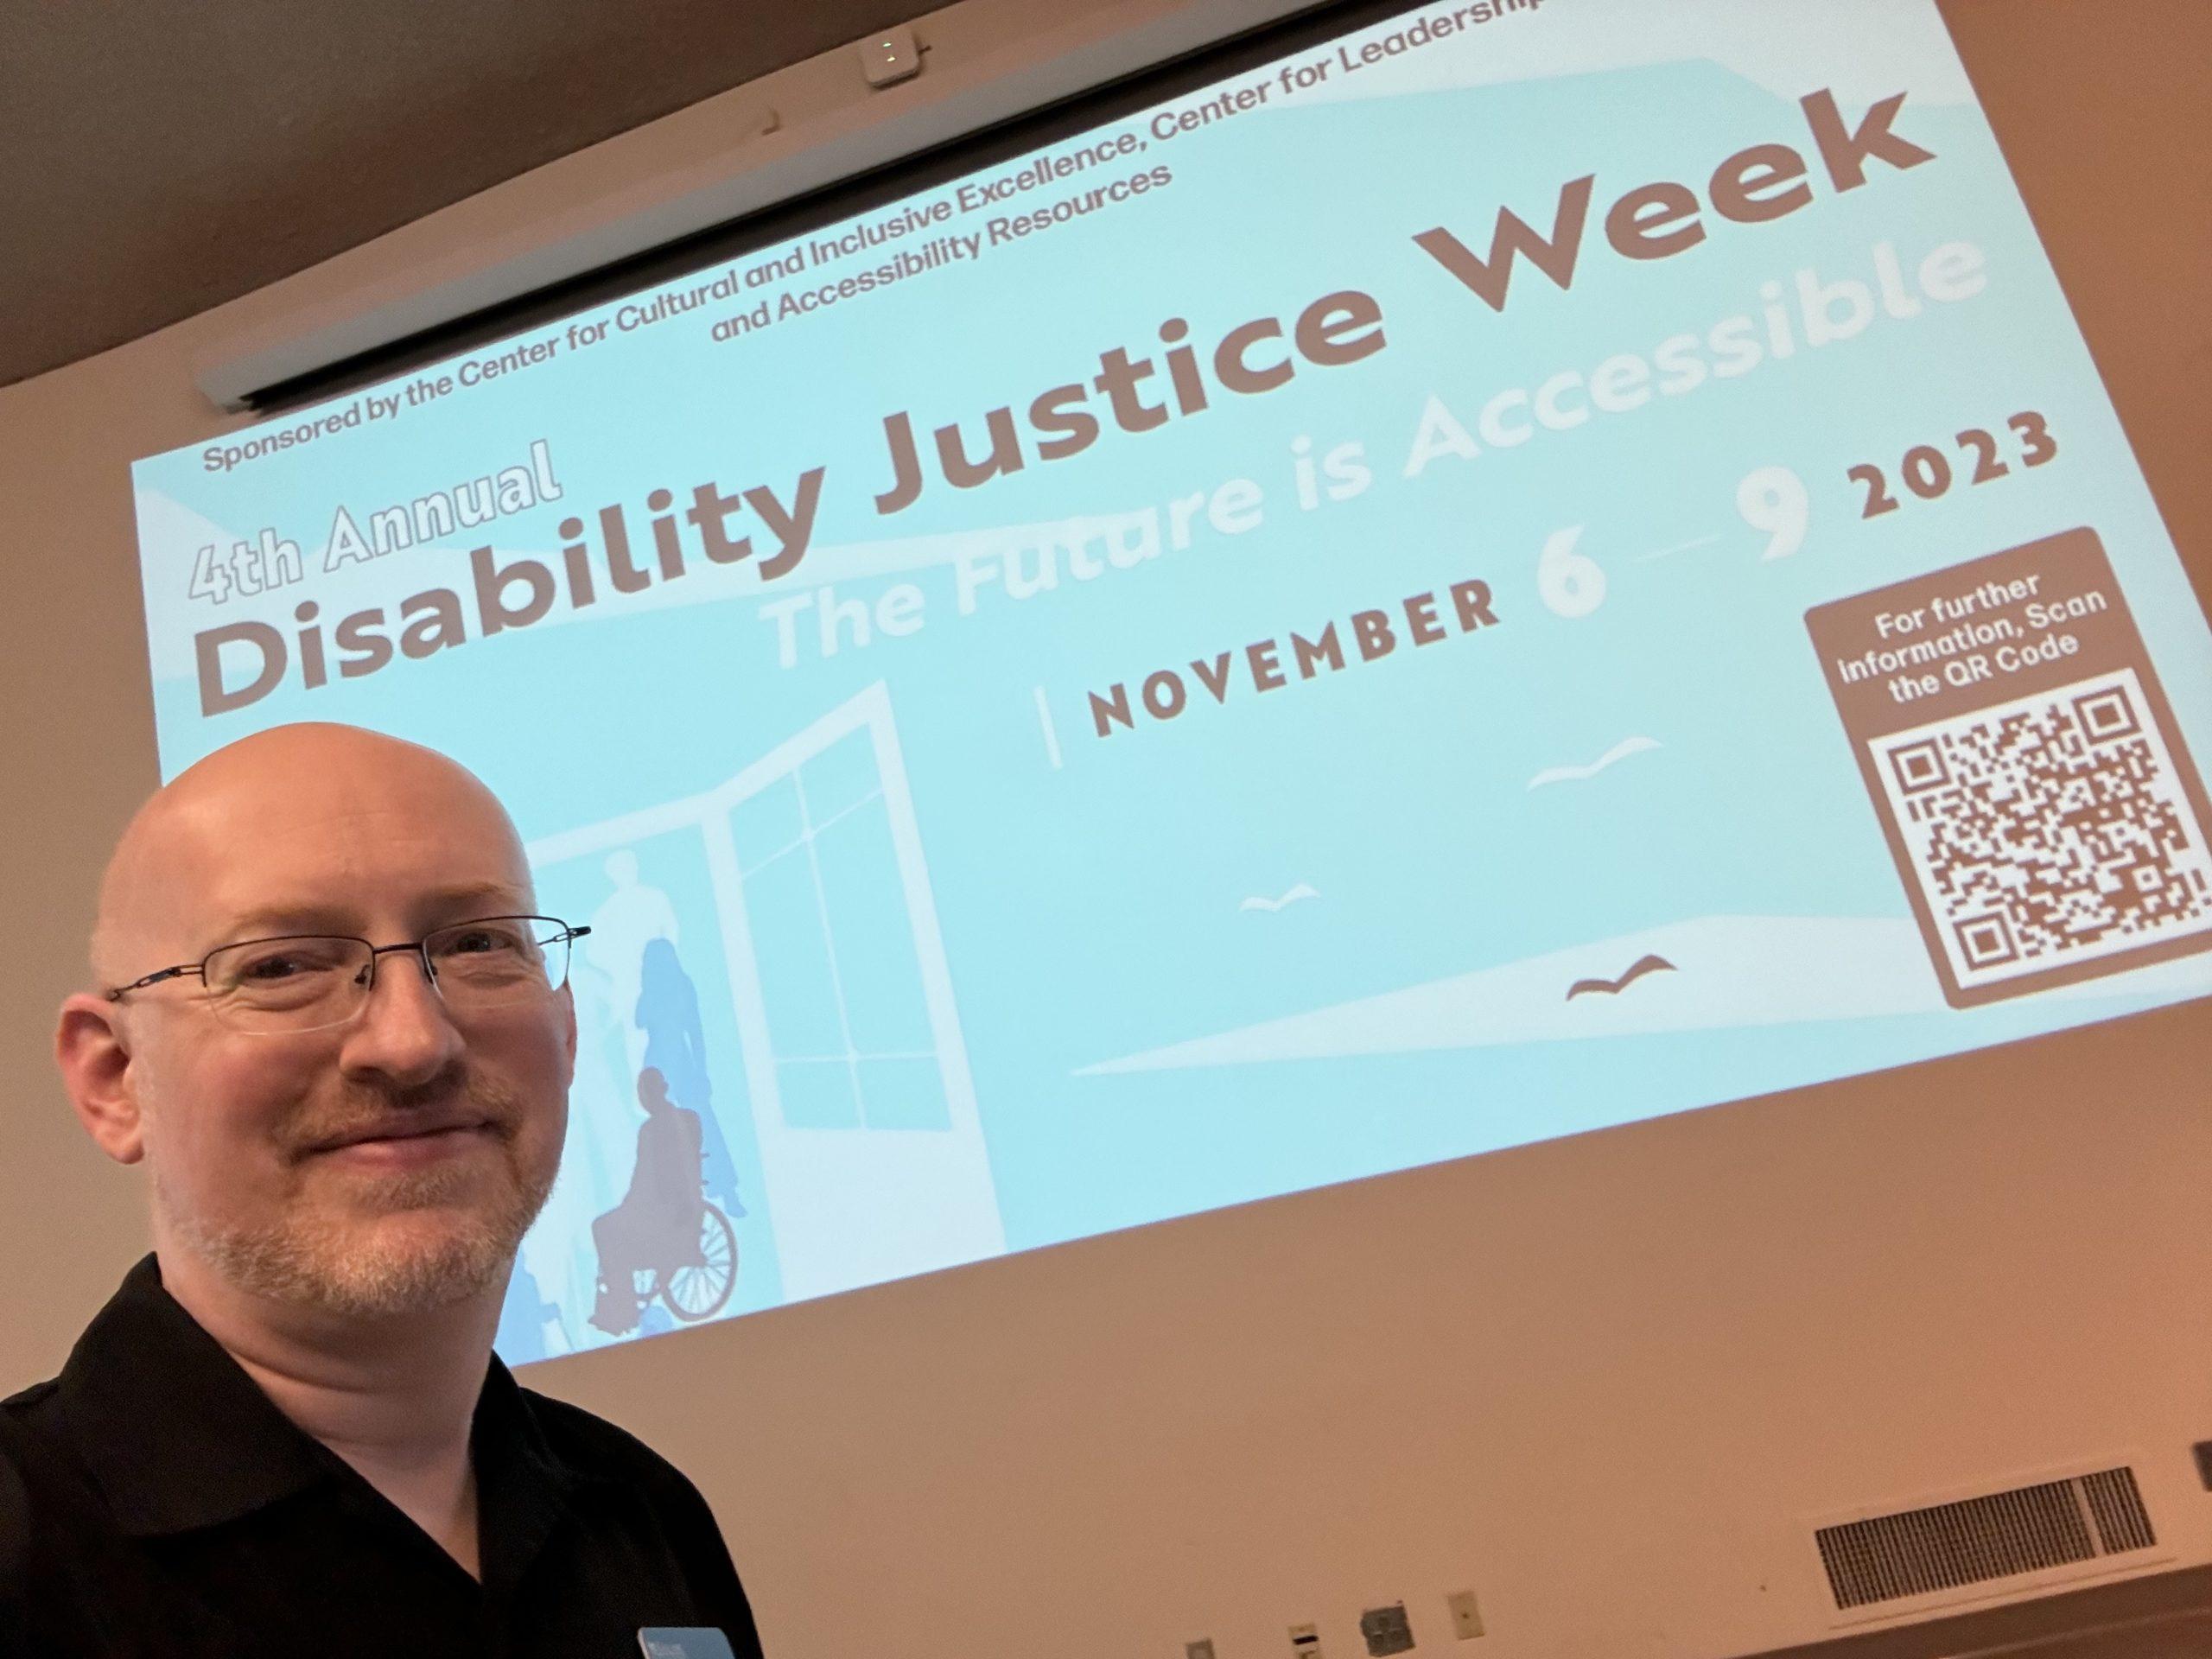 Me standing in front of a projected banner for Highline College's Disability Justice Week.